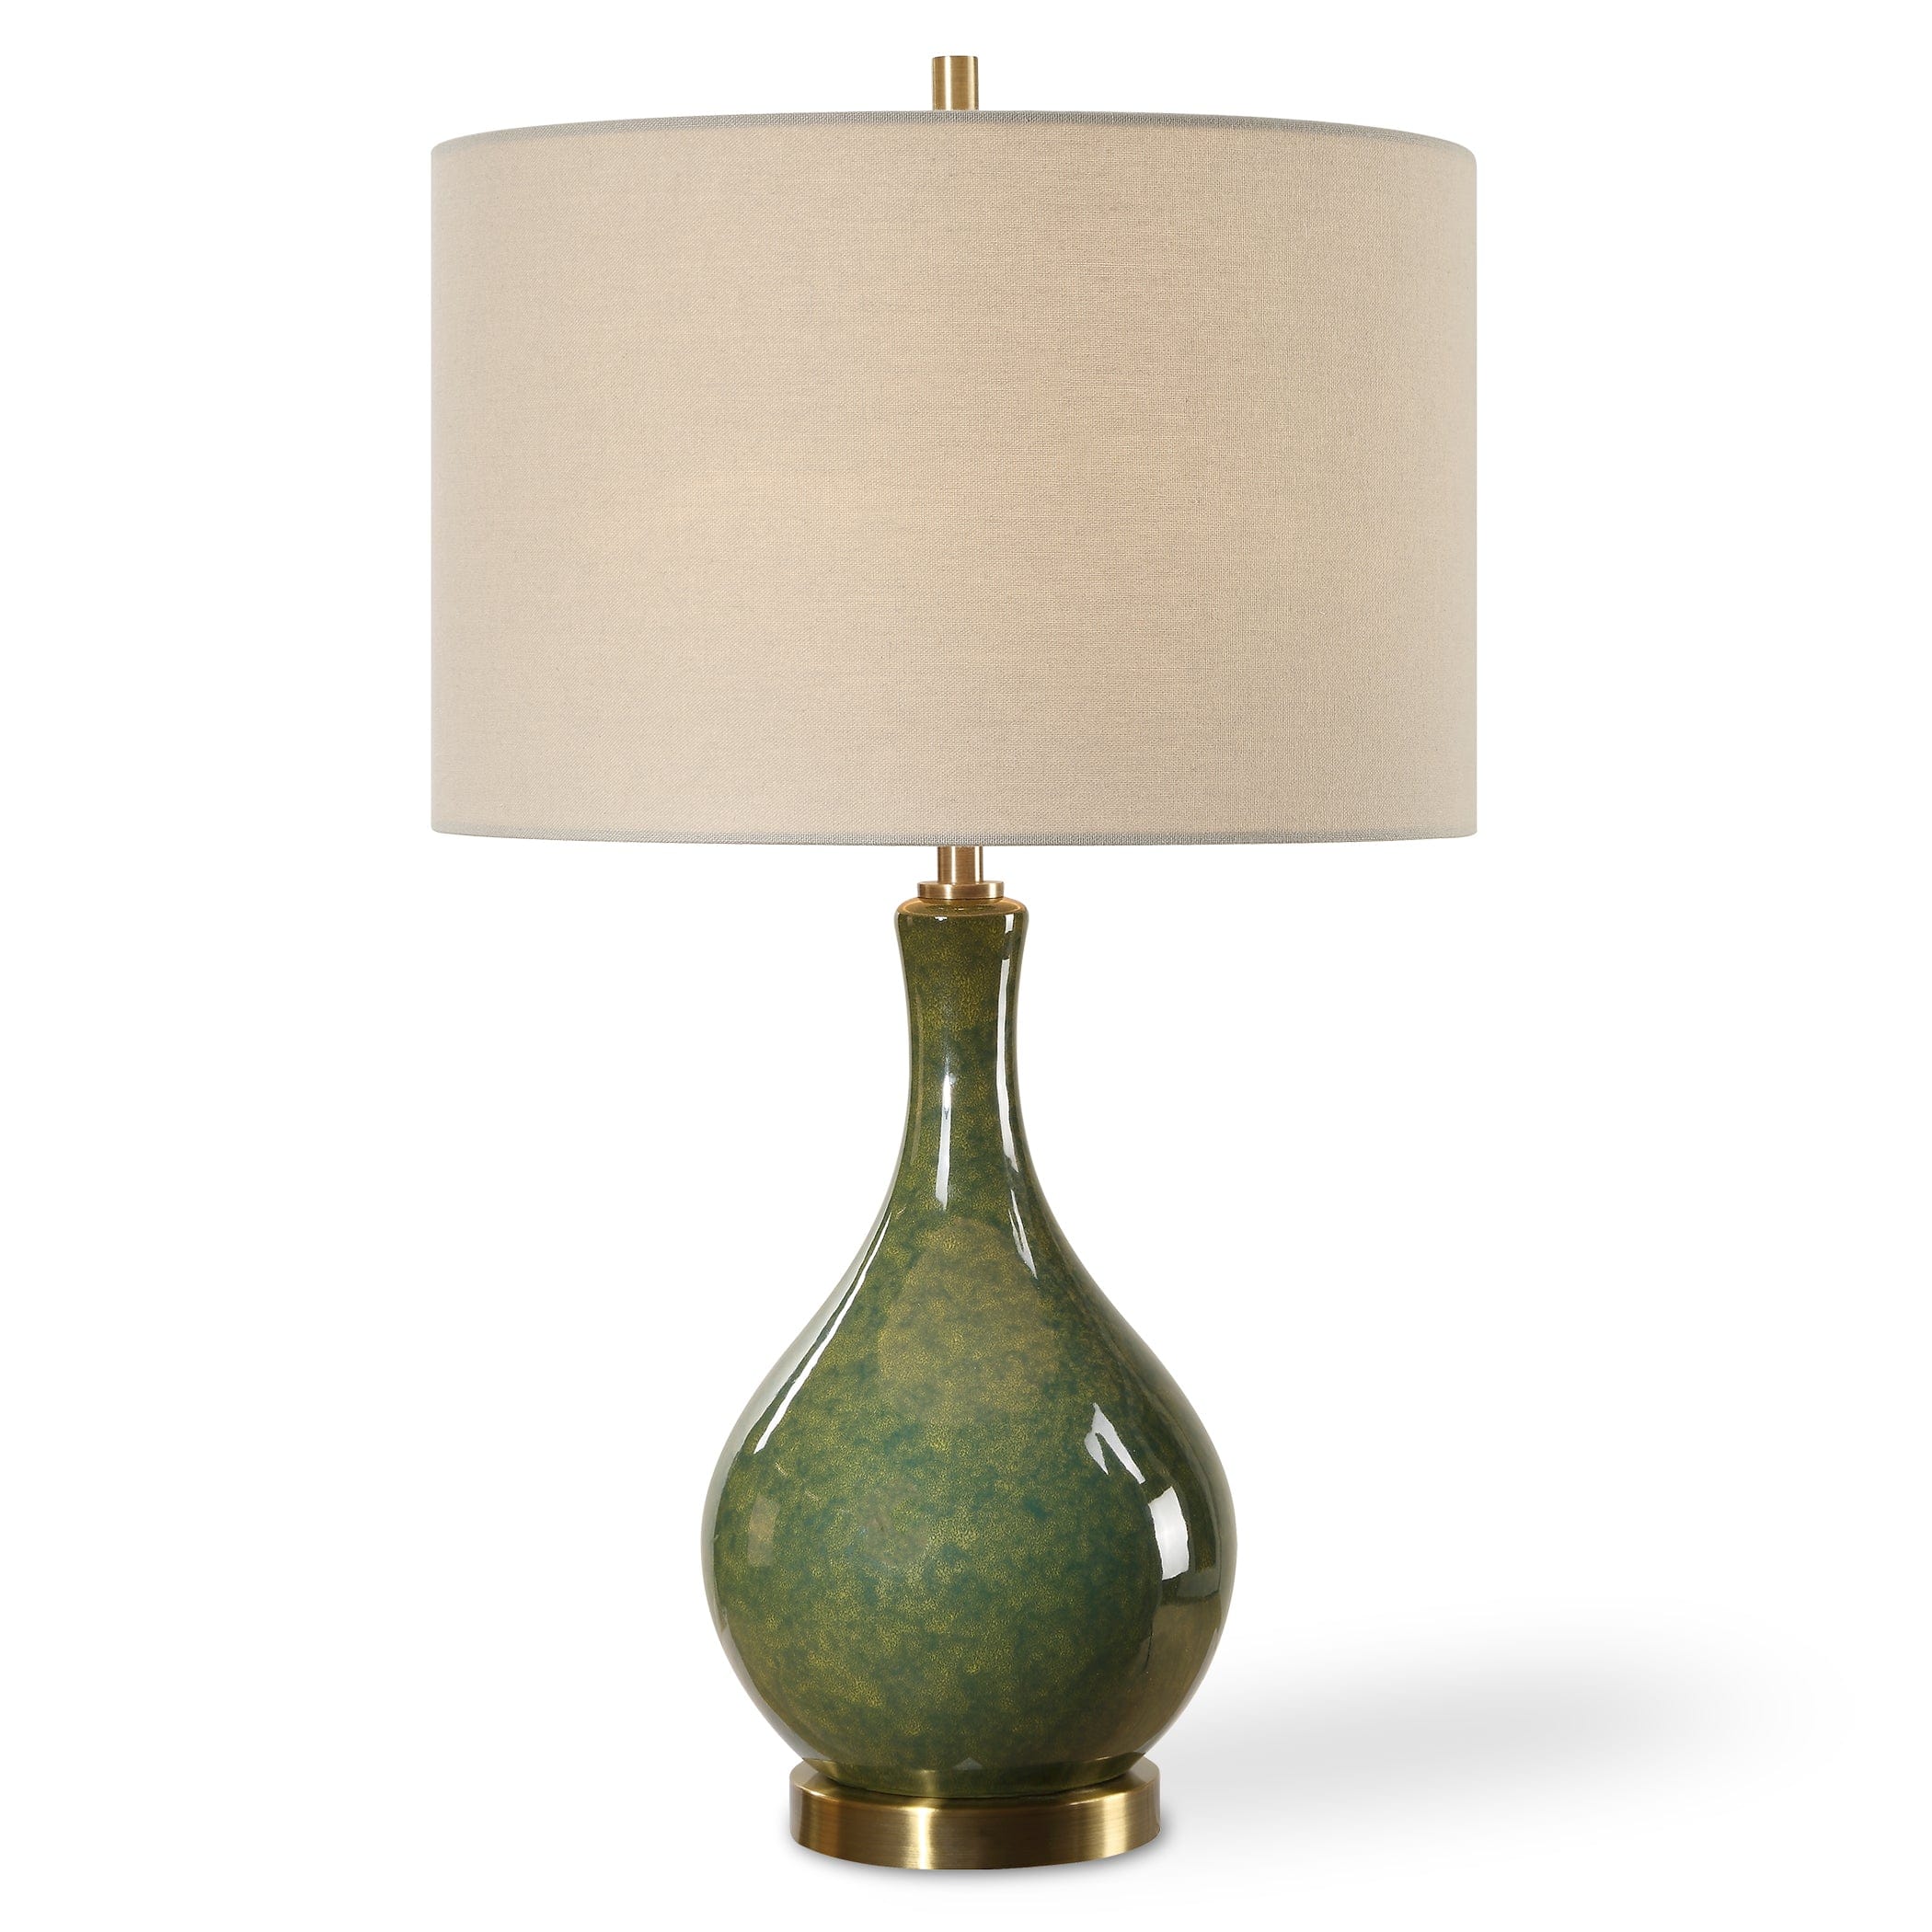 TABLE LAMP WL-17 Uttermost